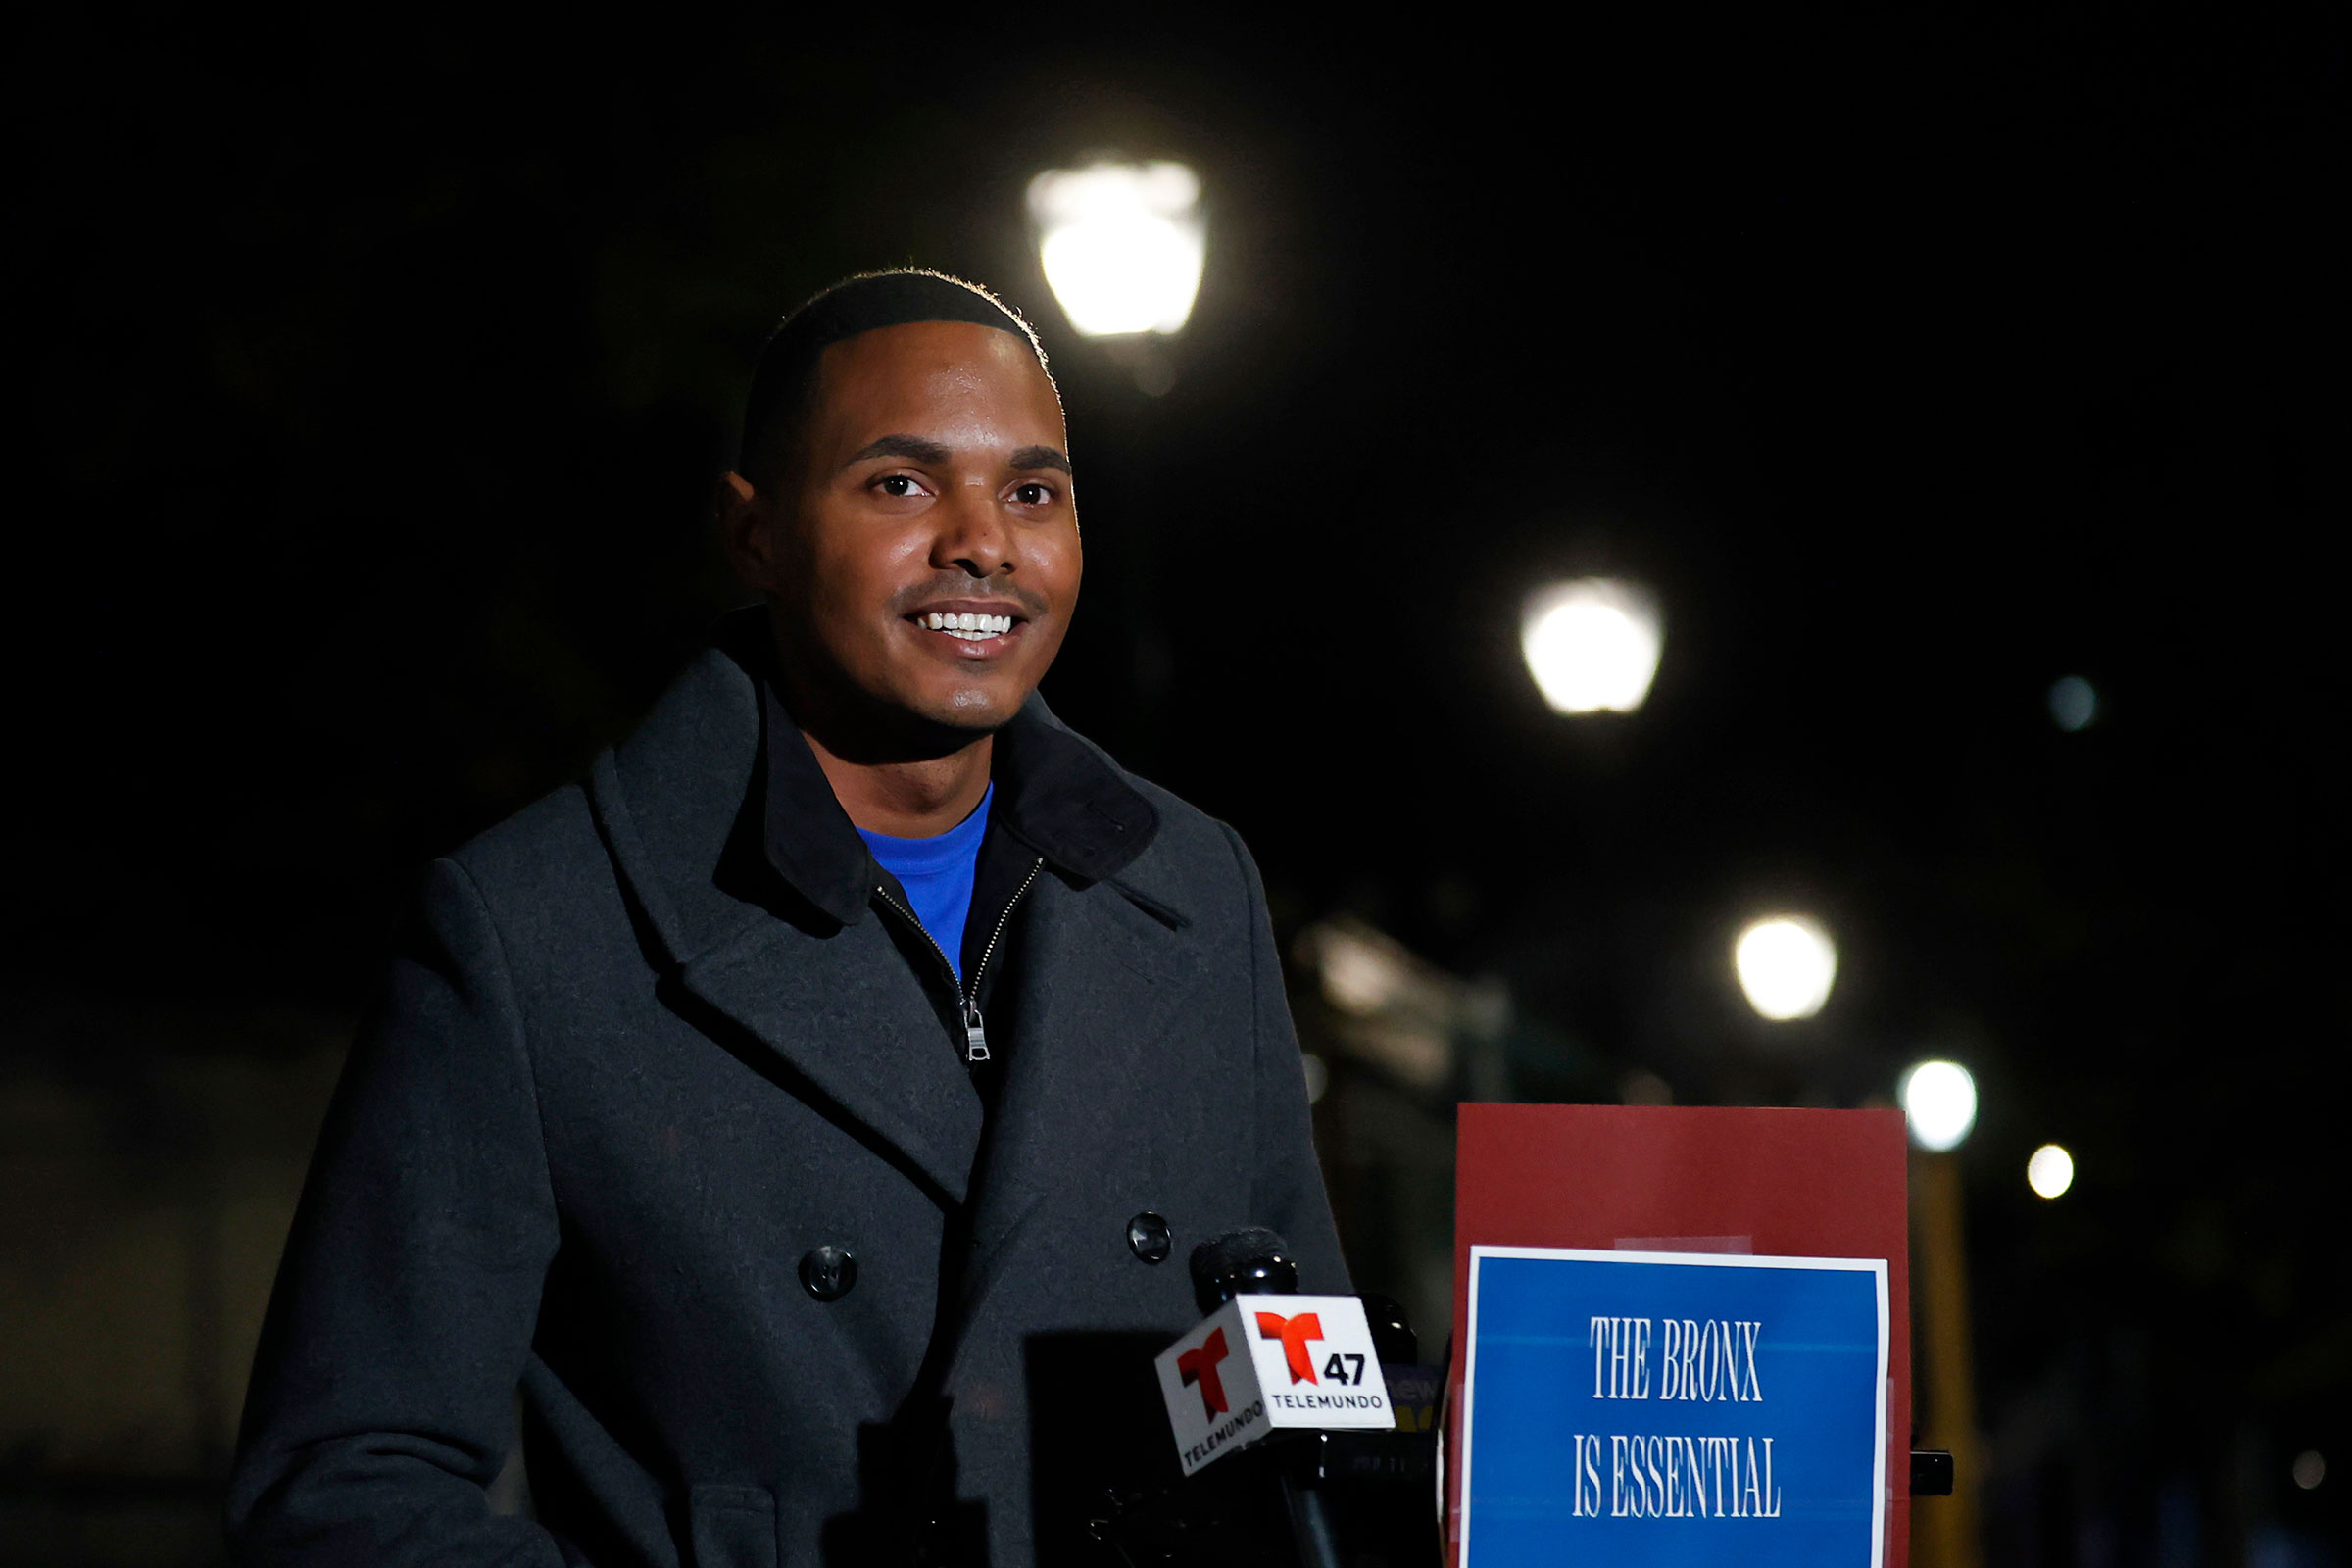 Representative-elect Ritchie Torres will become the first openly-gay, Black, Latino Congressman when Congress convenes on Jan. 3. (Adam Hunger—AP)